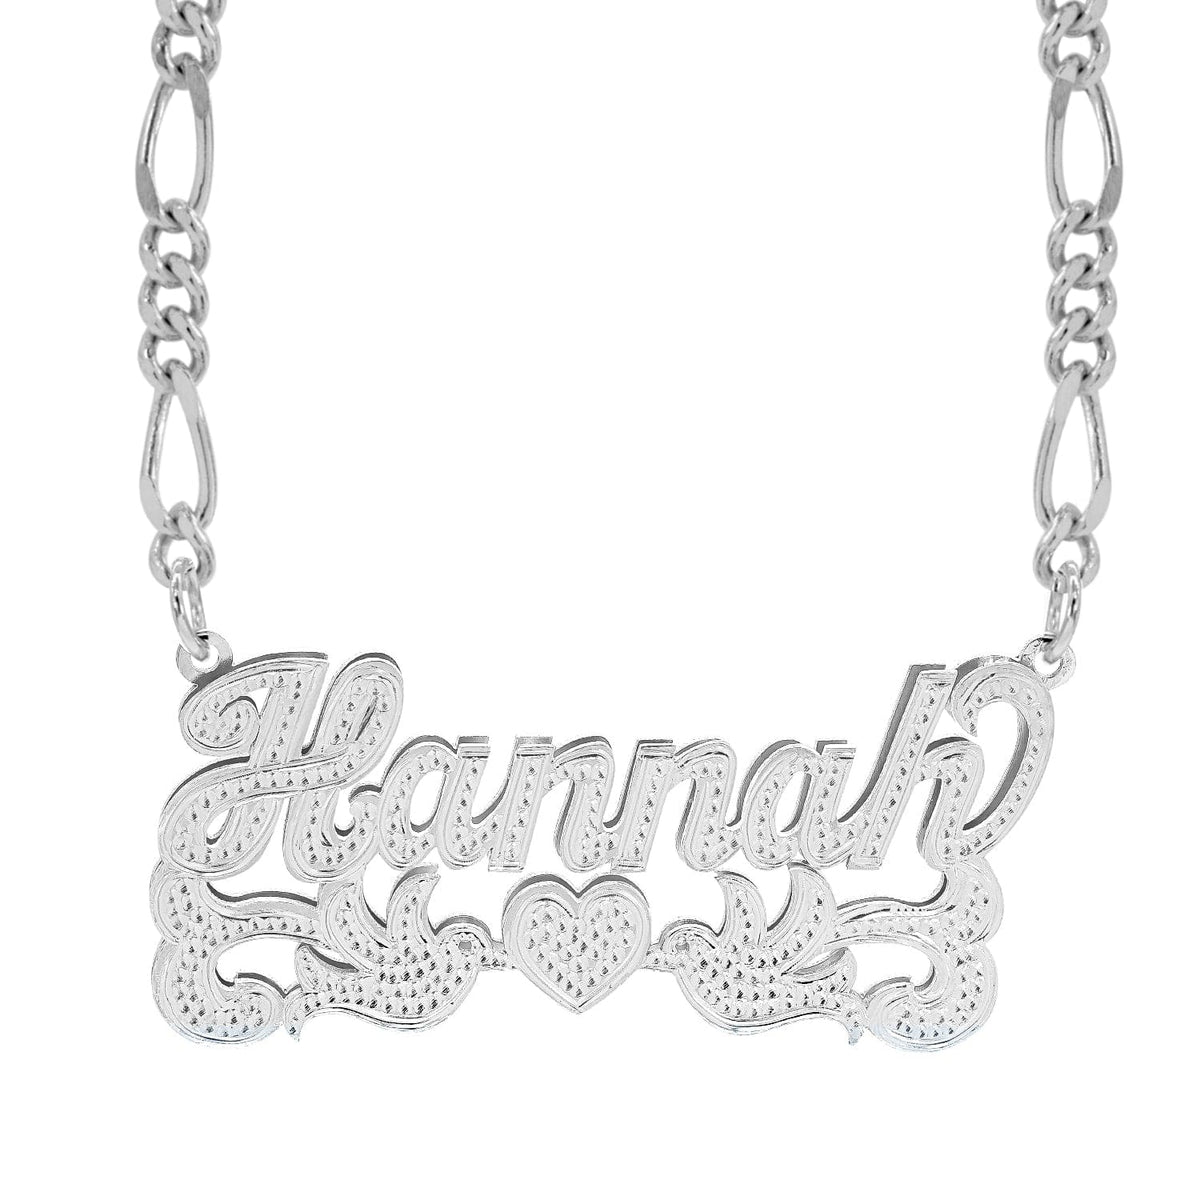 Sterling Silver / Figaro chain Double Nameplate Necklace w/ Love Birds and Centered Heart